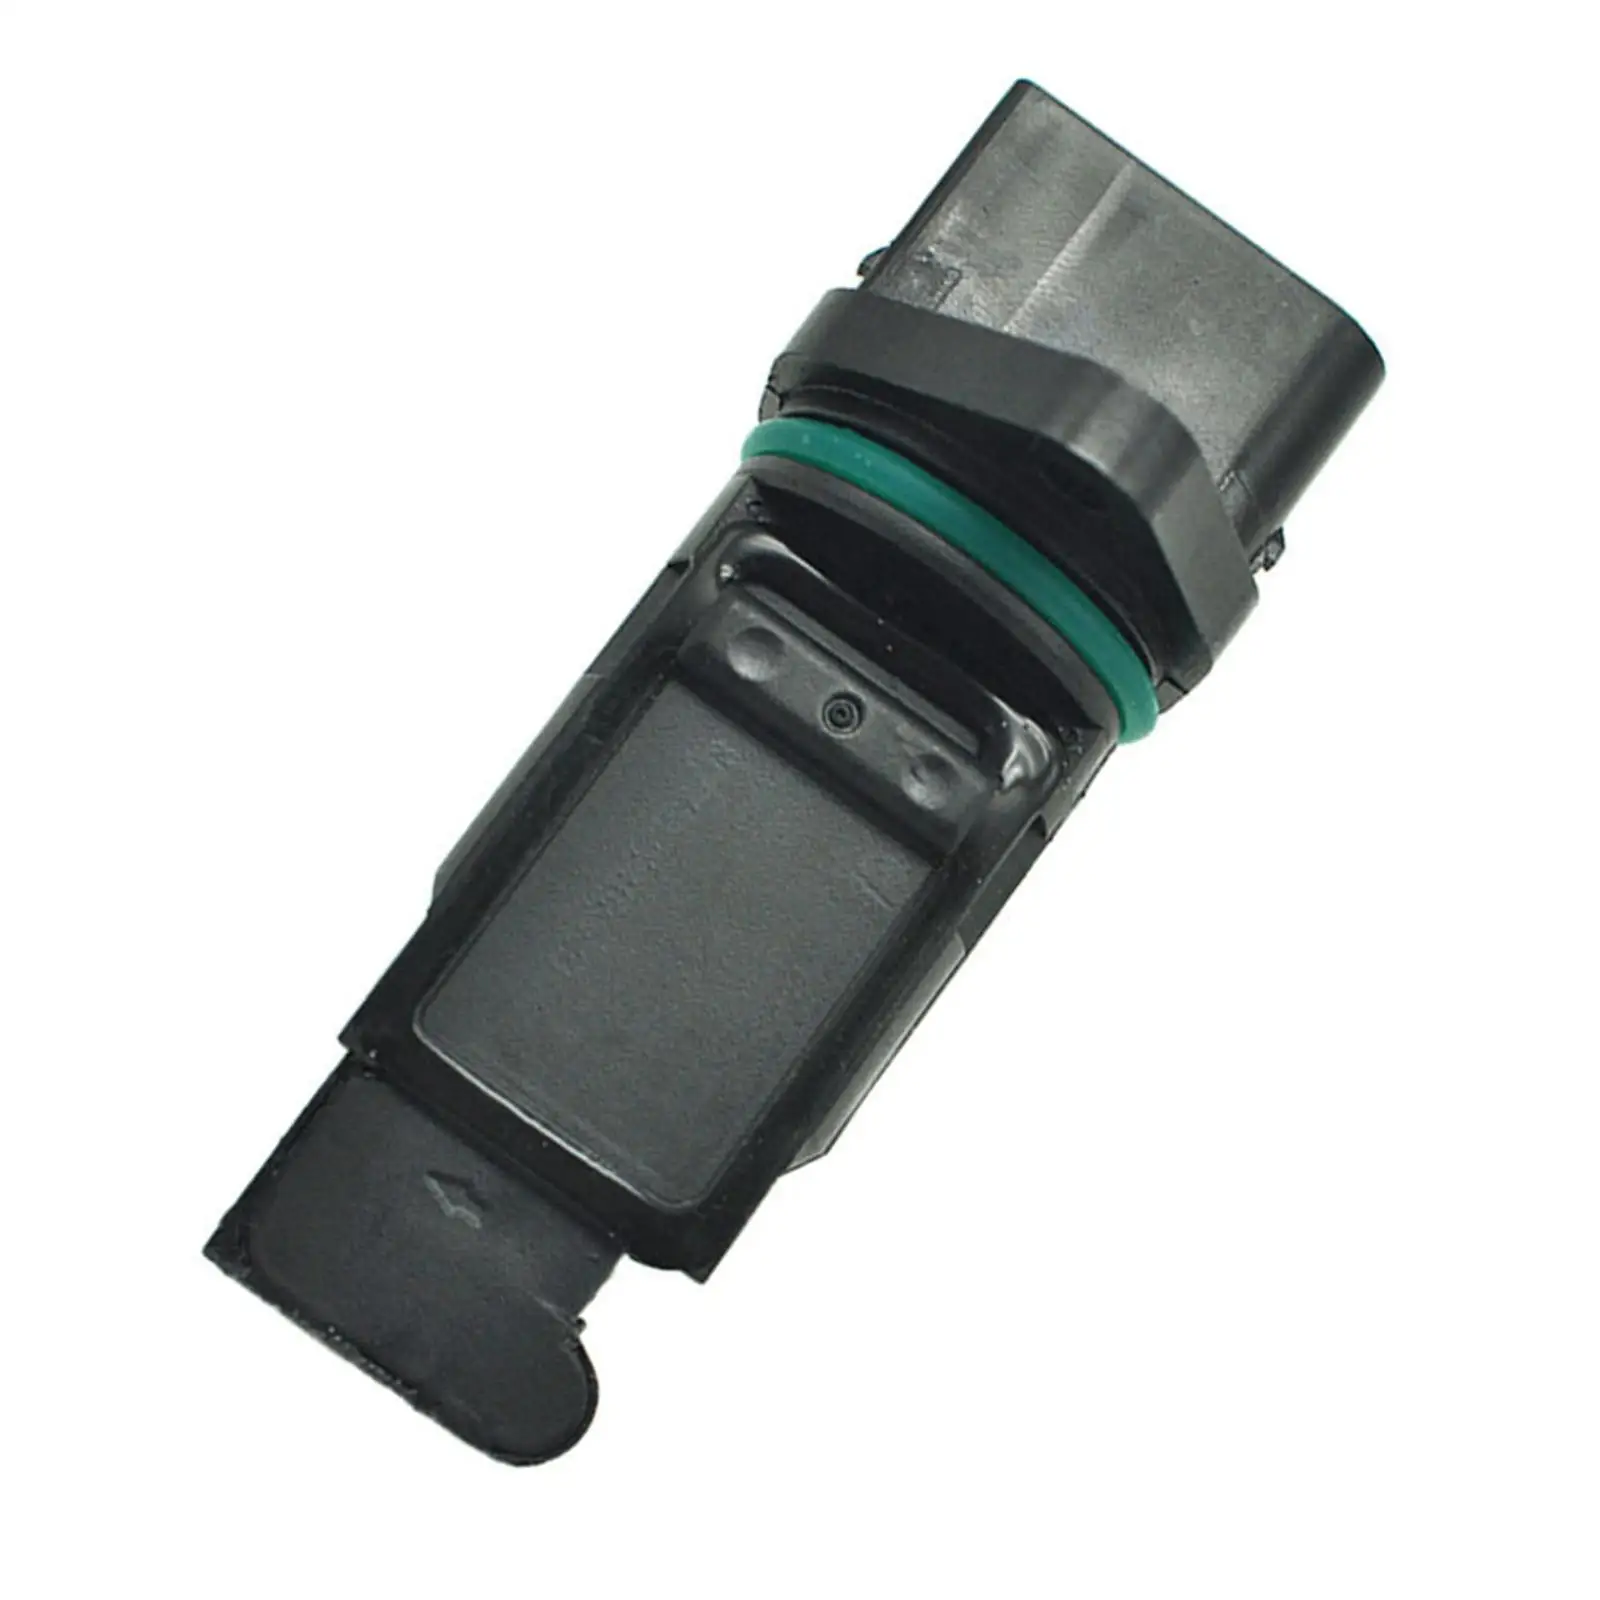   Maf Sensor Meter Black Assembly Fit for 911 3.4 97-2001 0280217007 99660612300 Stable Characteristics